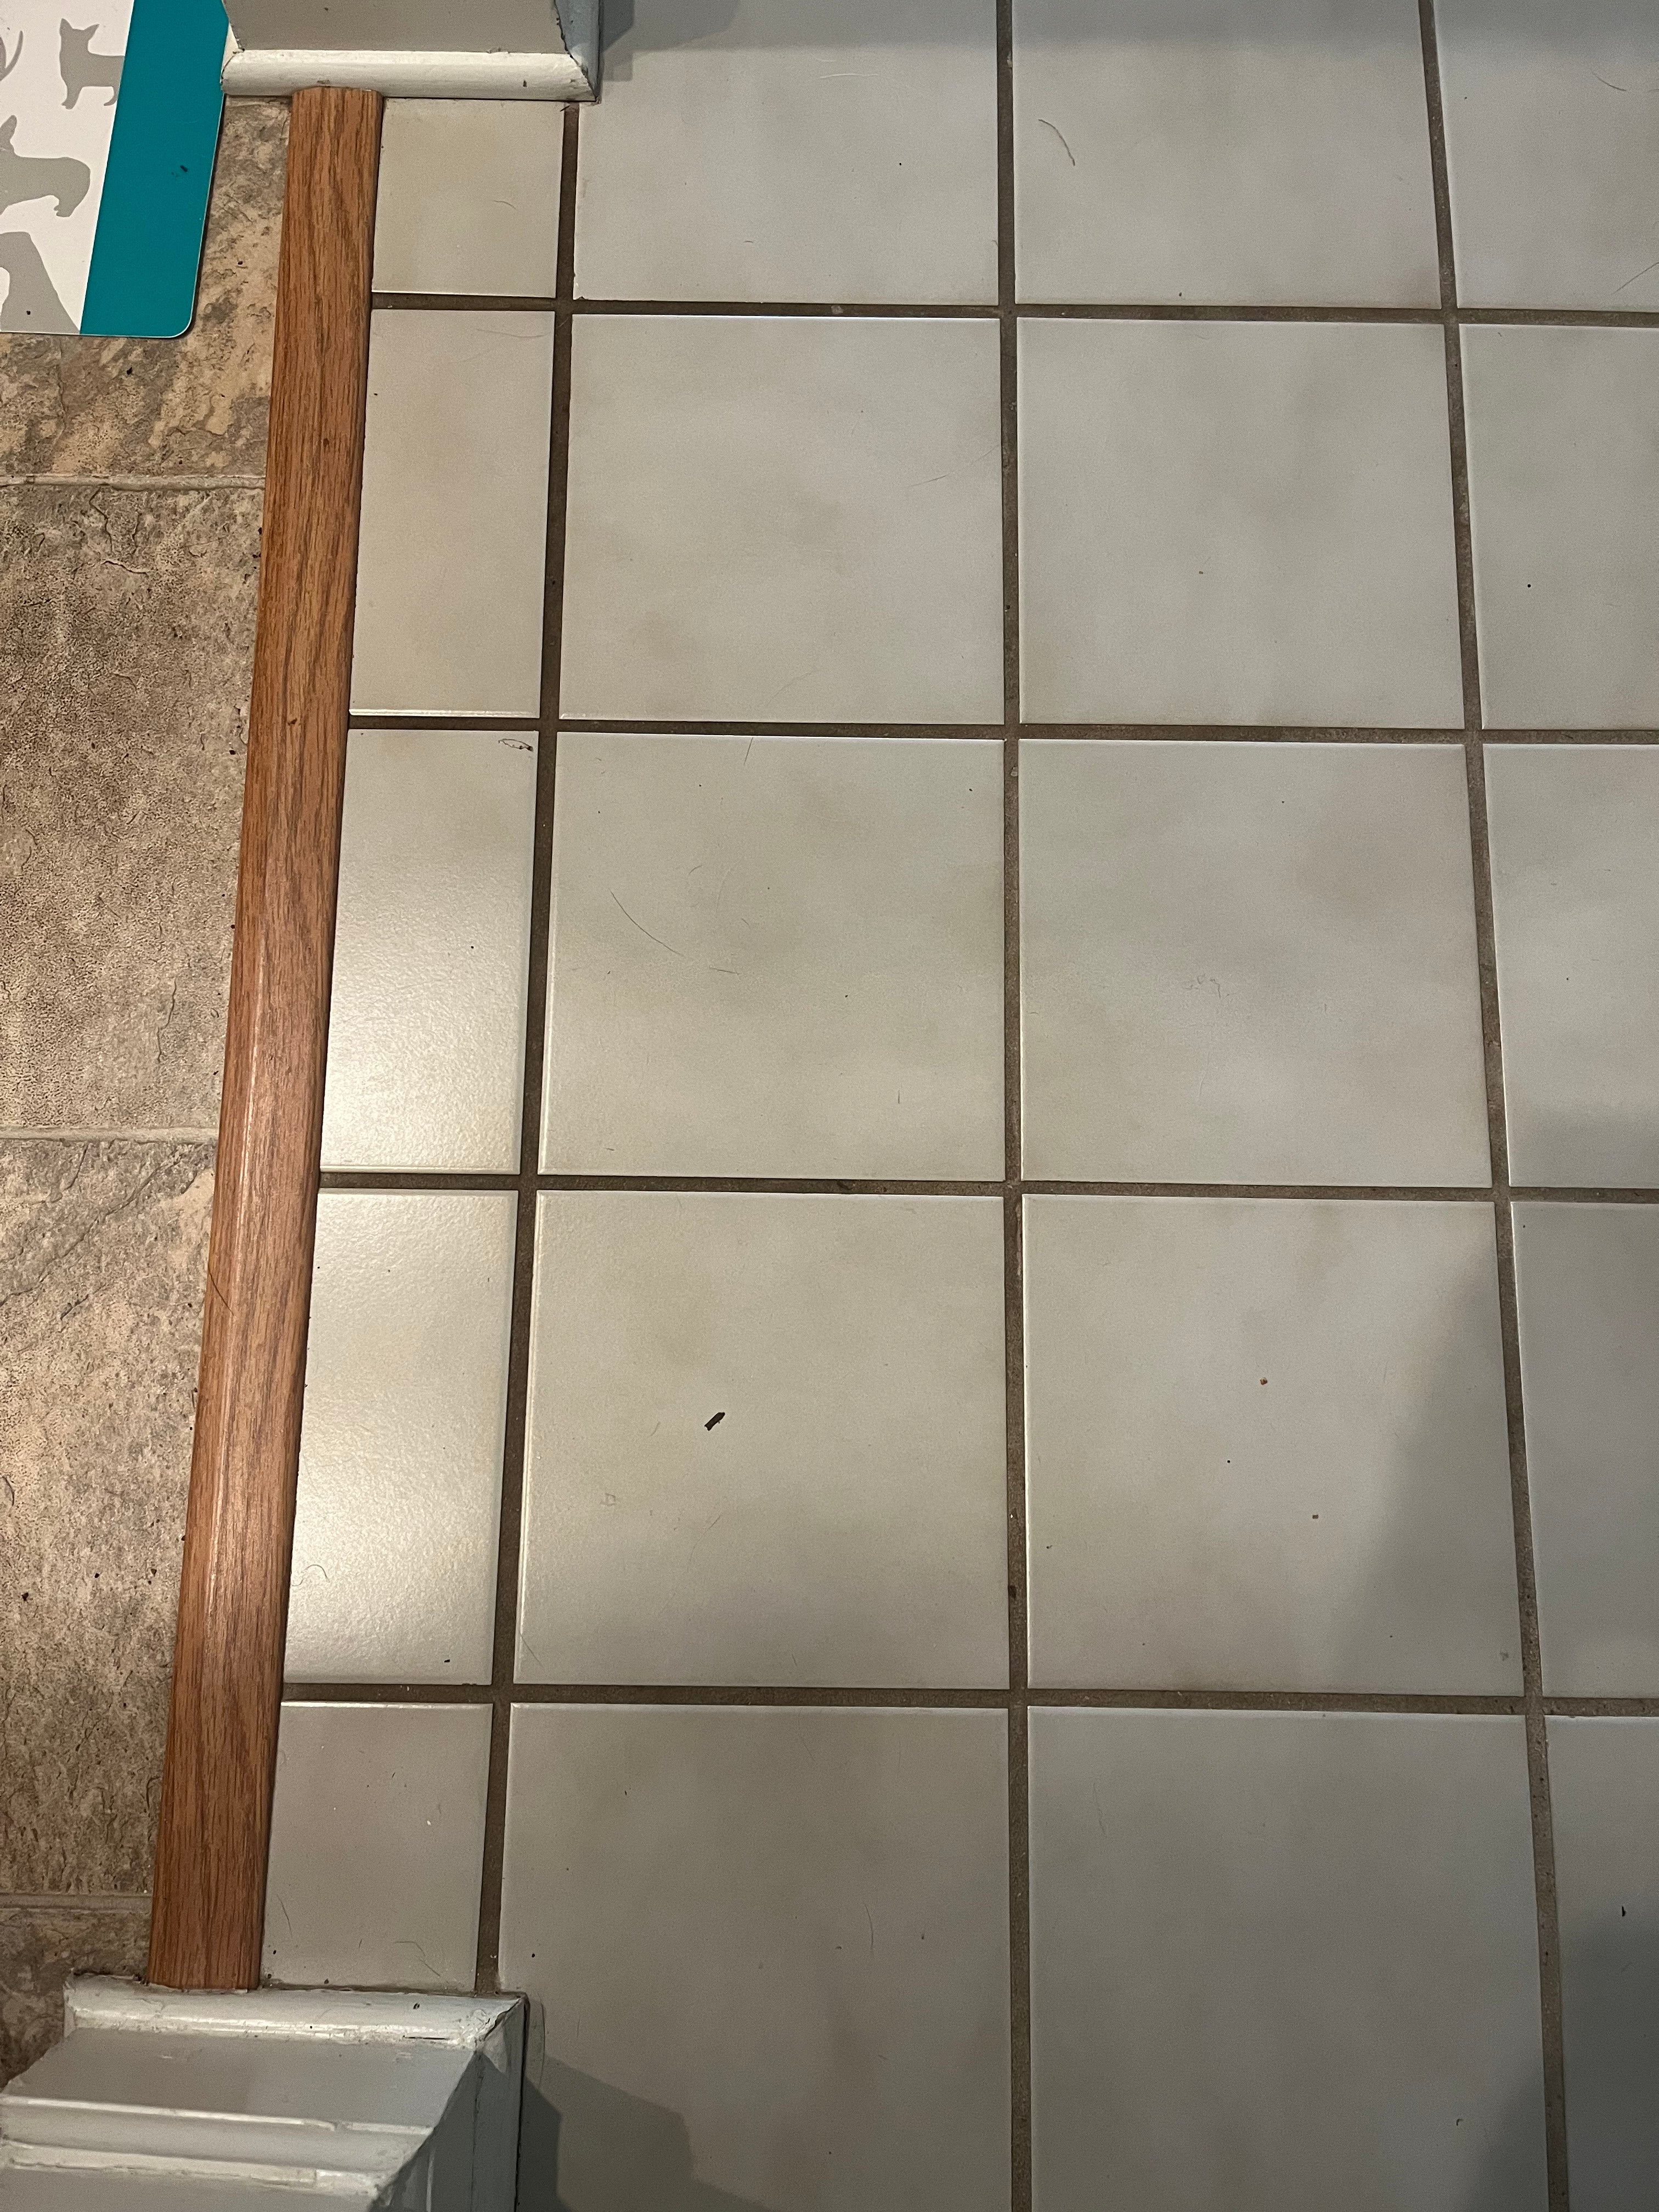 20 year old tile